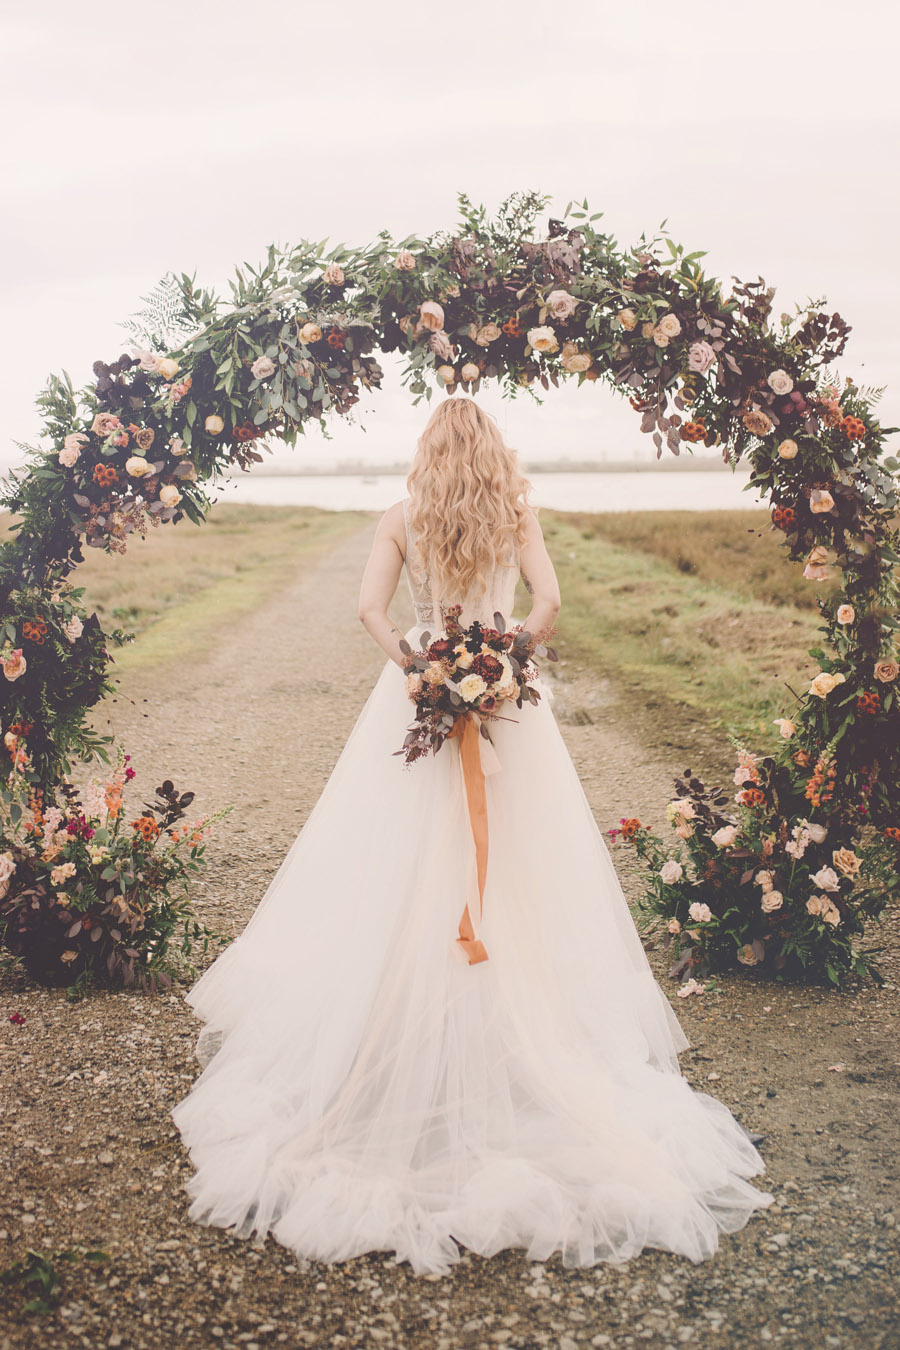 We Found Love! Natural, modern wedding inspiration from The Ferry House with images by Kerry Ann Duffy (37)